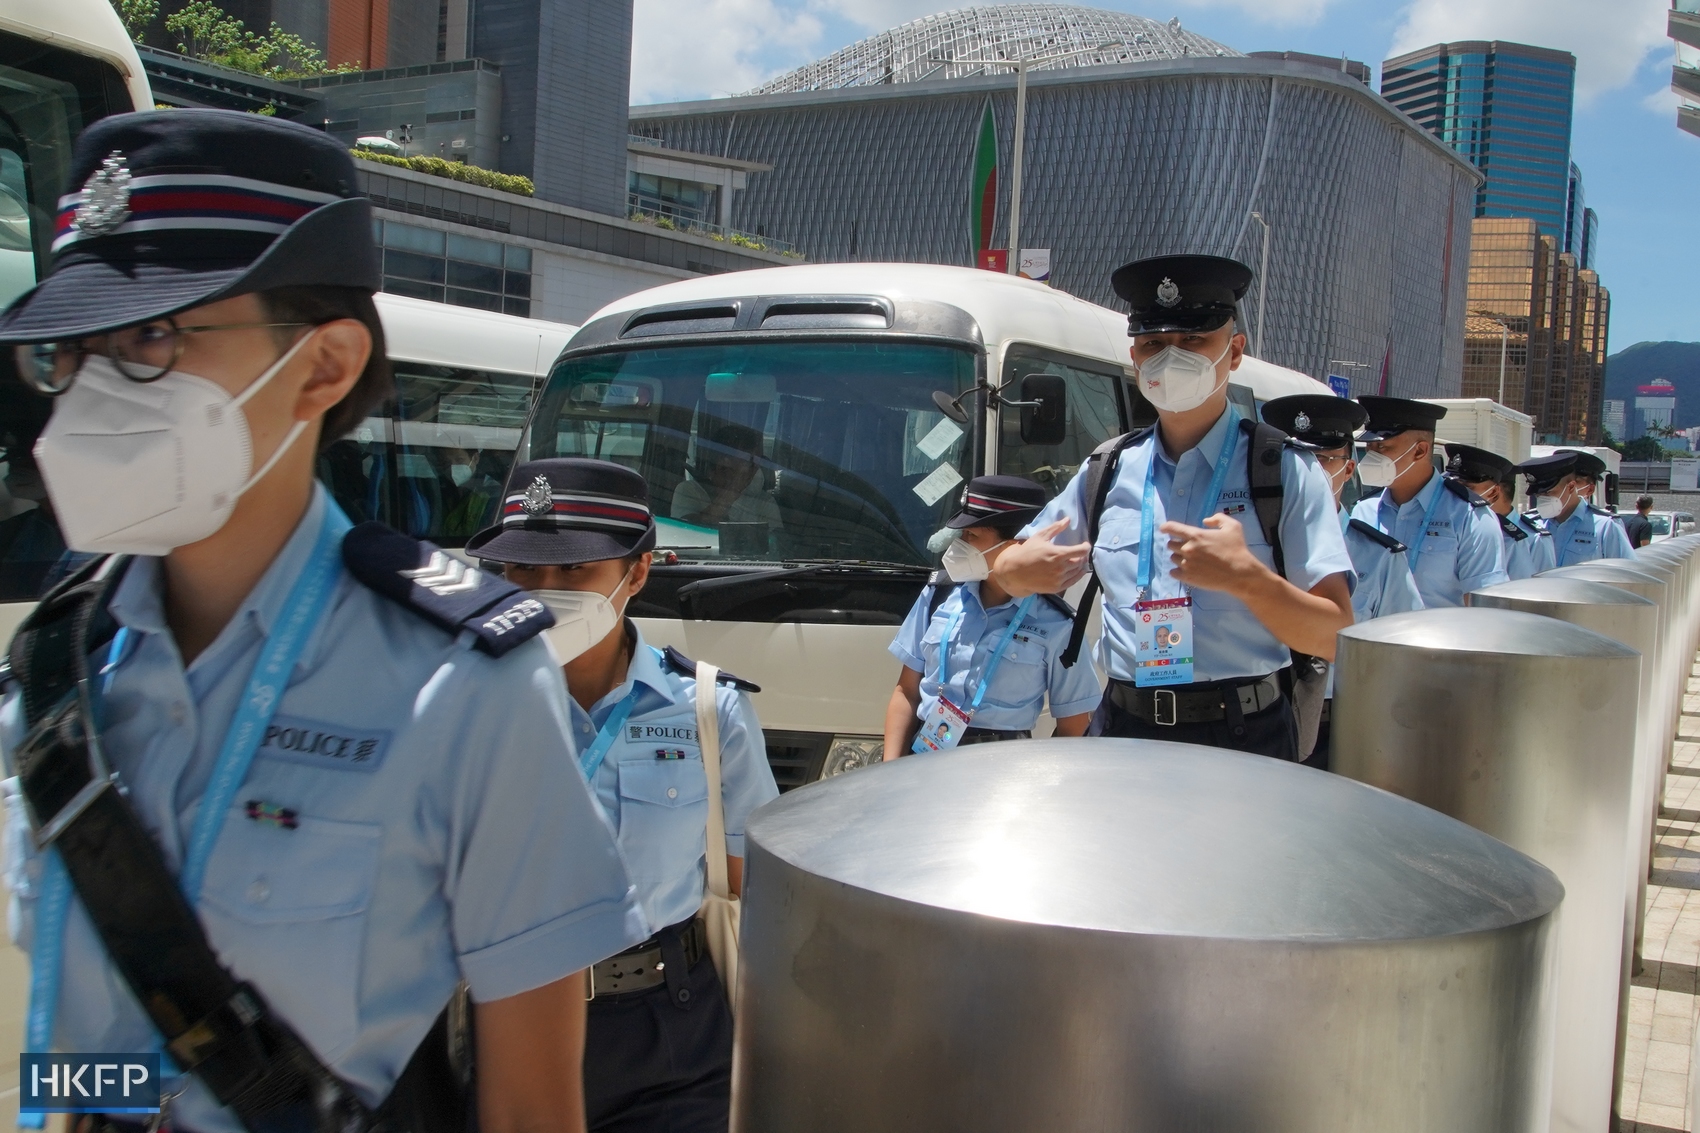 police officers west kowloon station handover anniversary